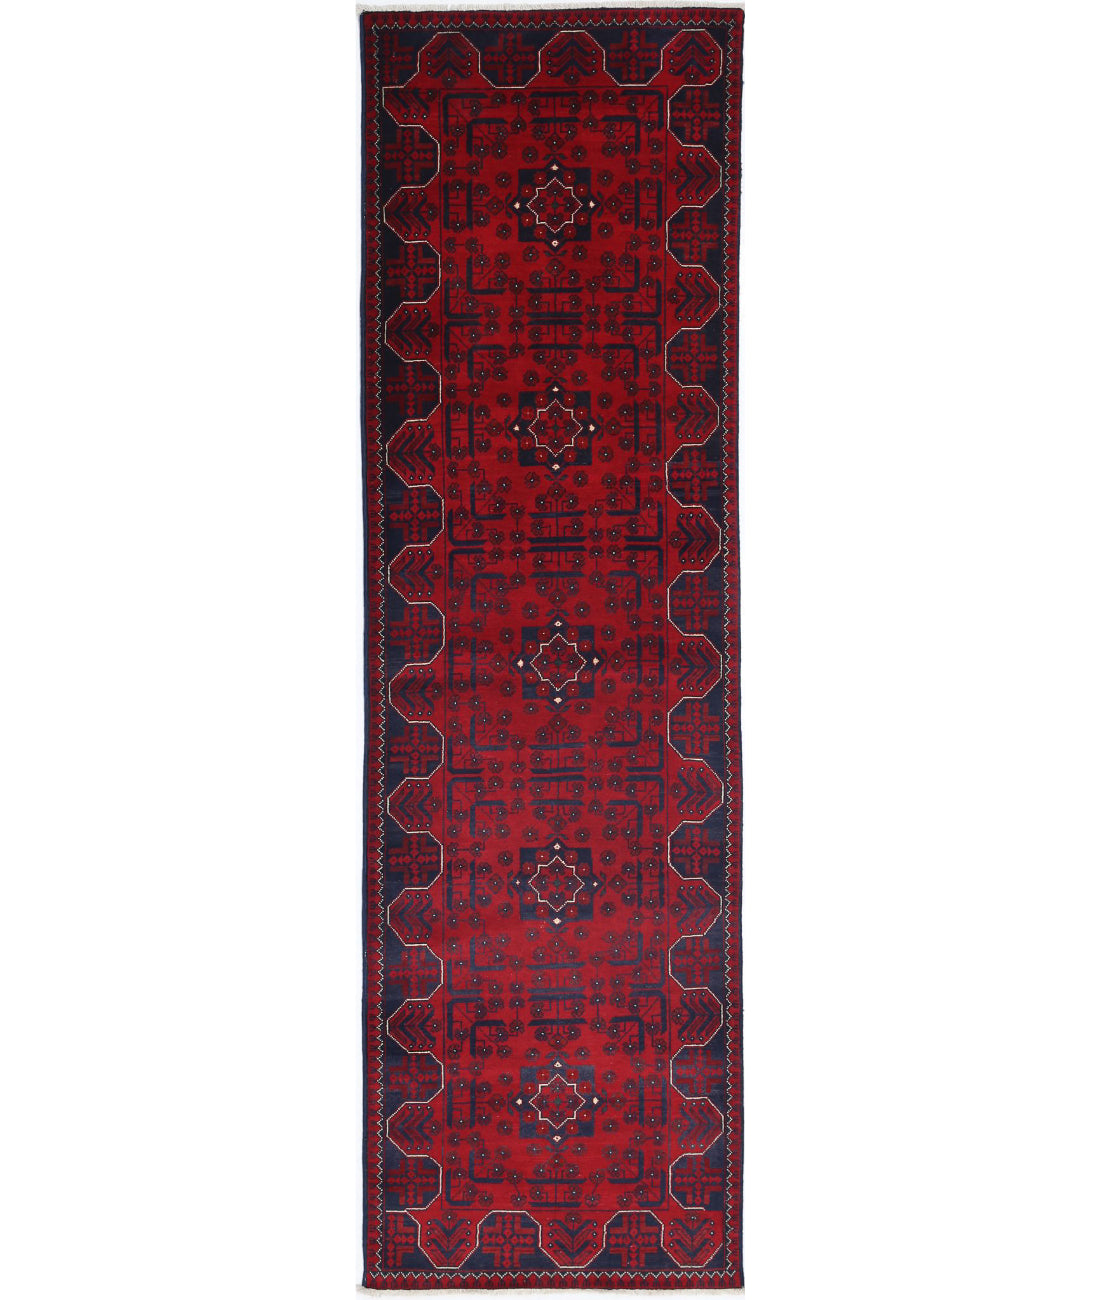 Afghan 2'6'' X 9'7'' Hand-Knotted Wool Rug 2'6'' x 9'7'' (75 X 288) / Red / N/A